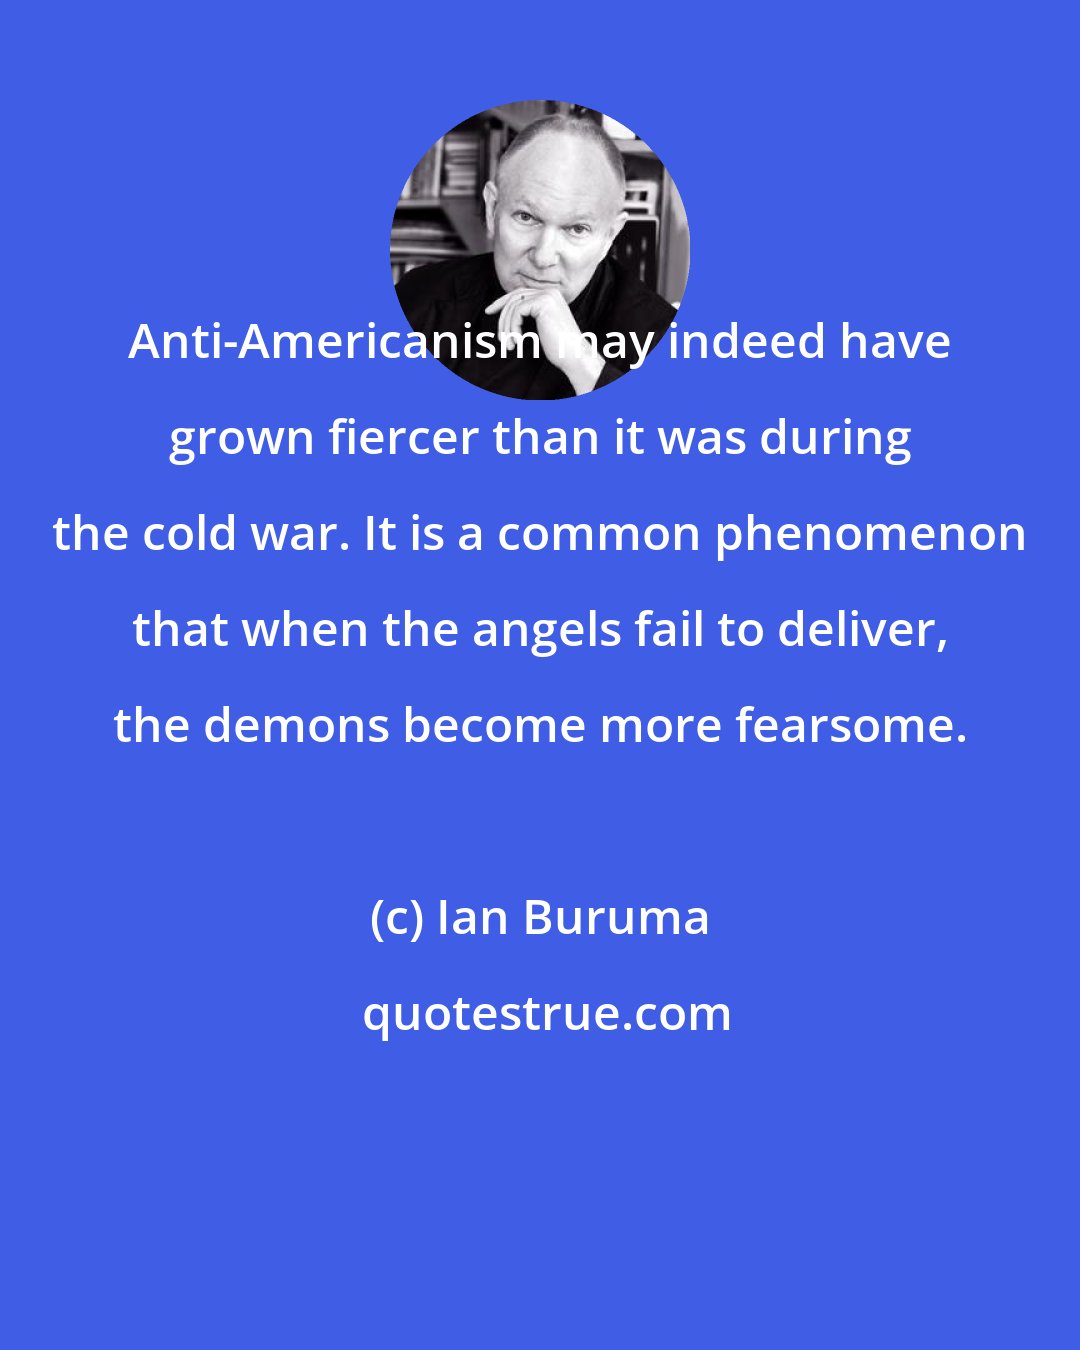 Ian Buruma: Anti-Americanism may indeed have grown fiercer than it was during the cold war. It is a common phenomenon that when the angels fail to deliver, the demons become more fearsome.